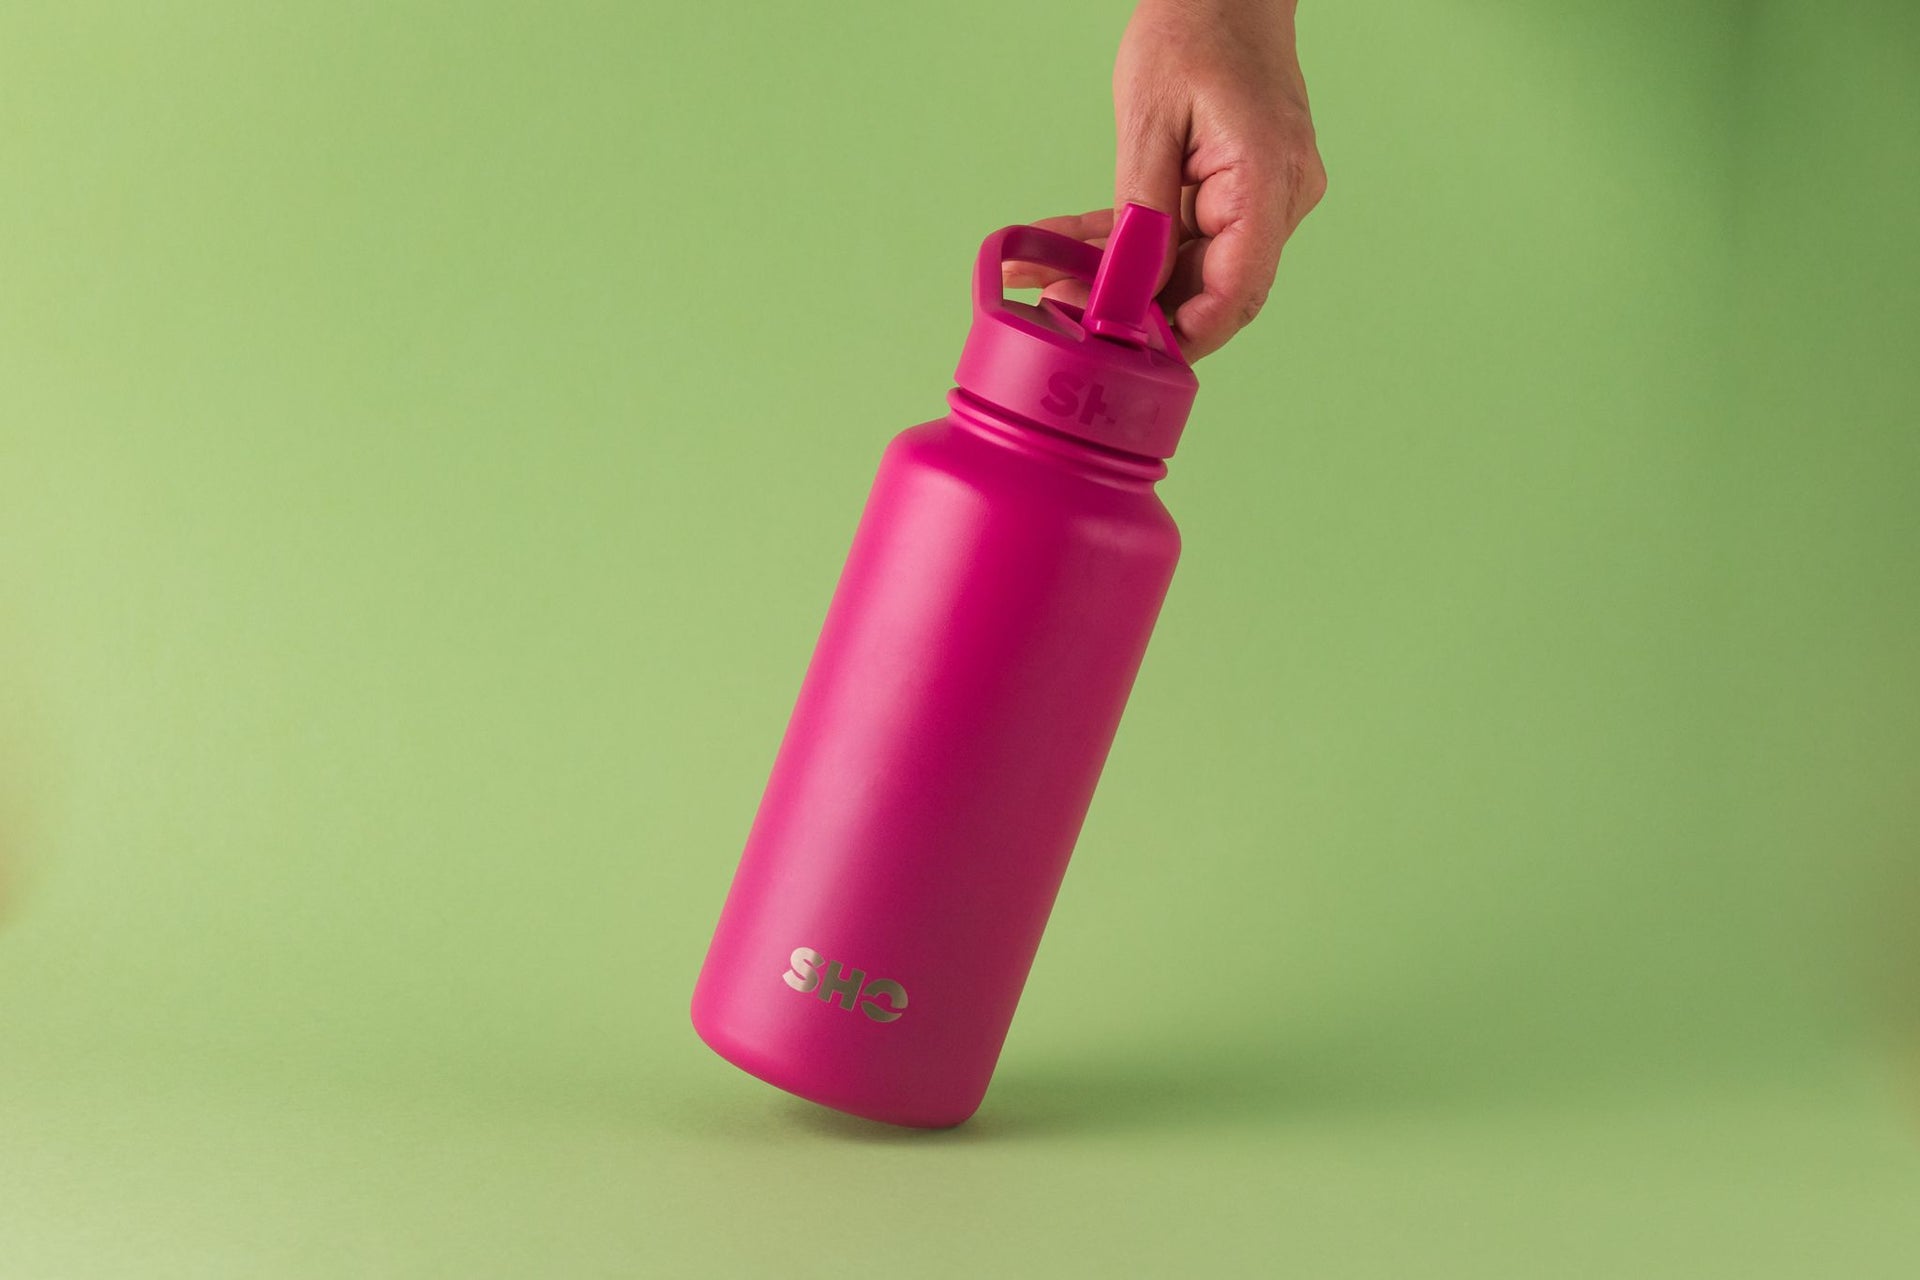 Initial Water Bottle - Pink, E